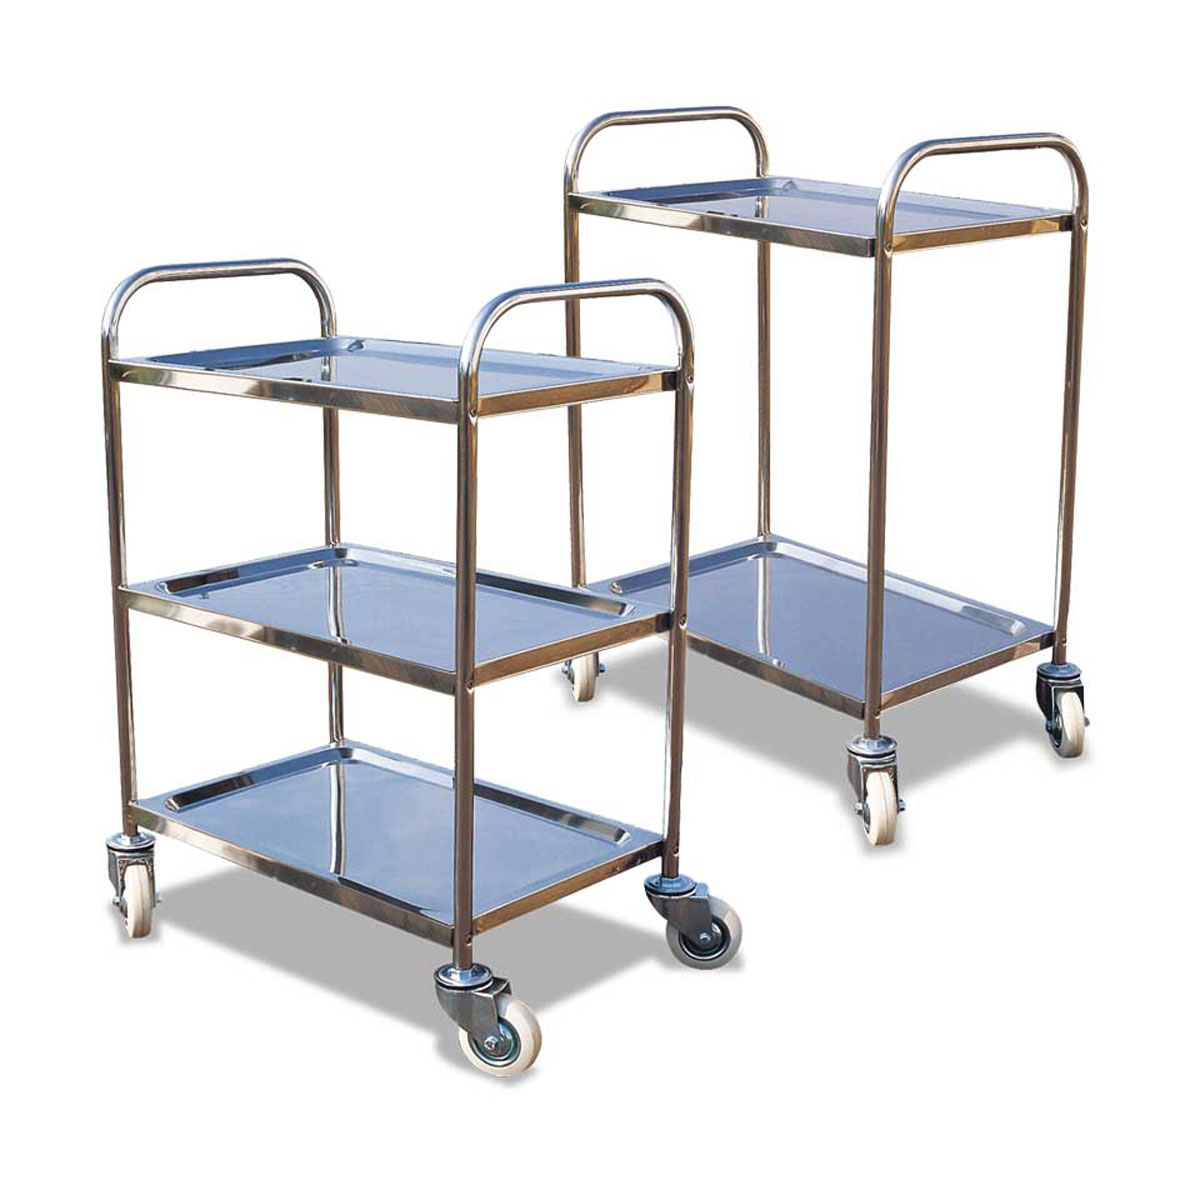 Buy Order-picking Trolley (2-3 Shelf - Stainless Steel) available at Astrolift NZ